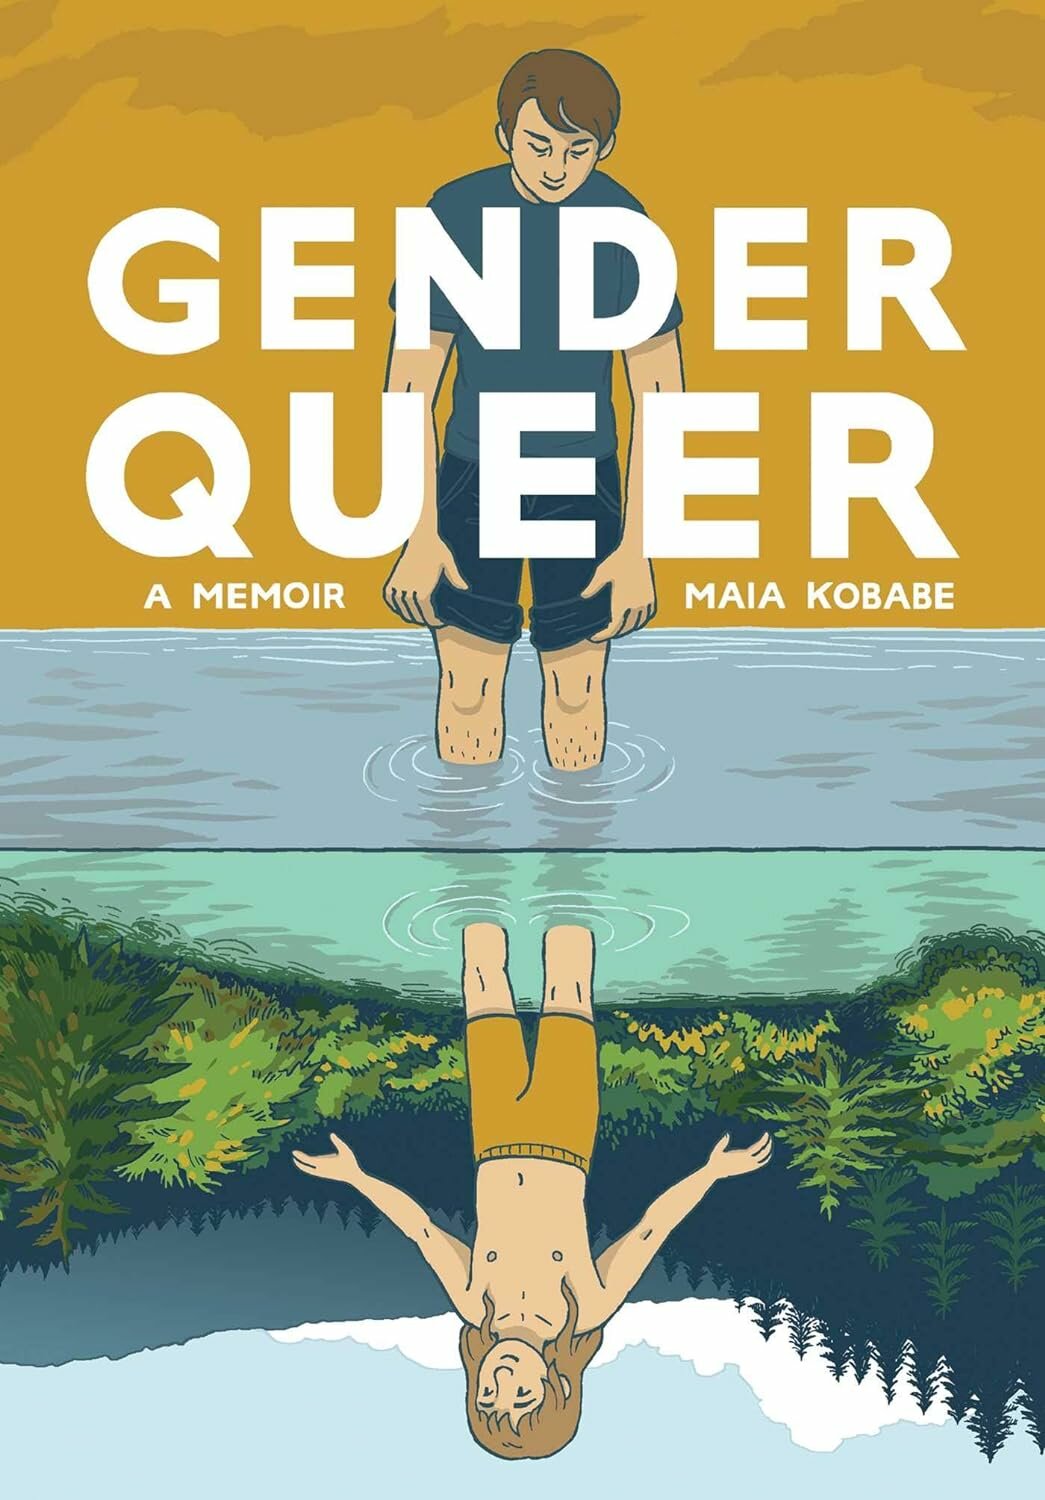 To view “Gender Queer: A Memoir” or “All the Boys Aren’t Blue: A Memoir Manifesto” in totality for the controversial scenes, it can be purchased on amazon.com.